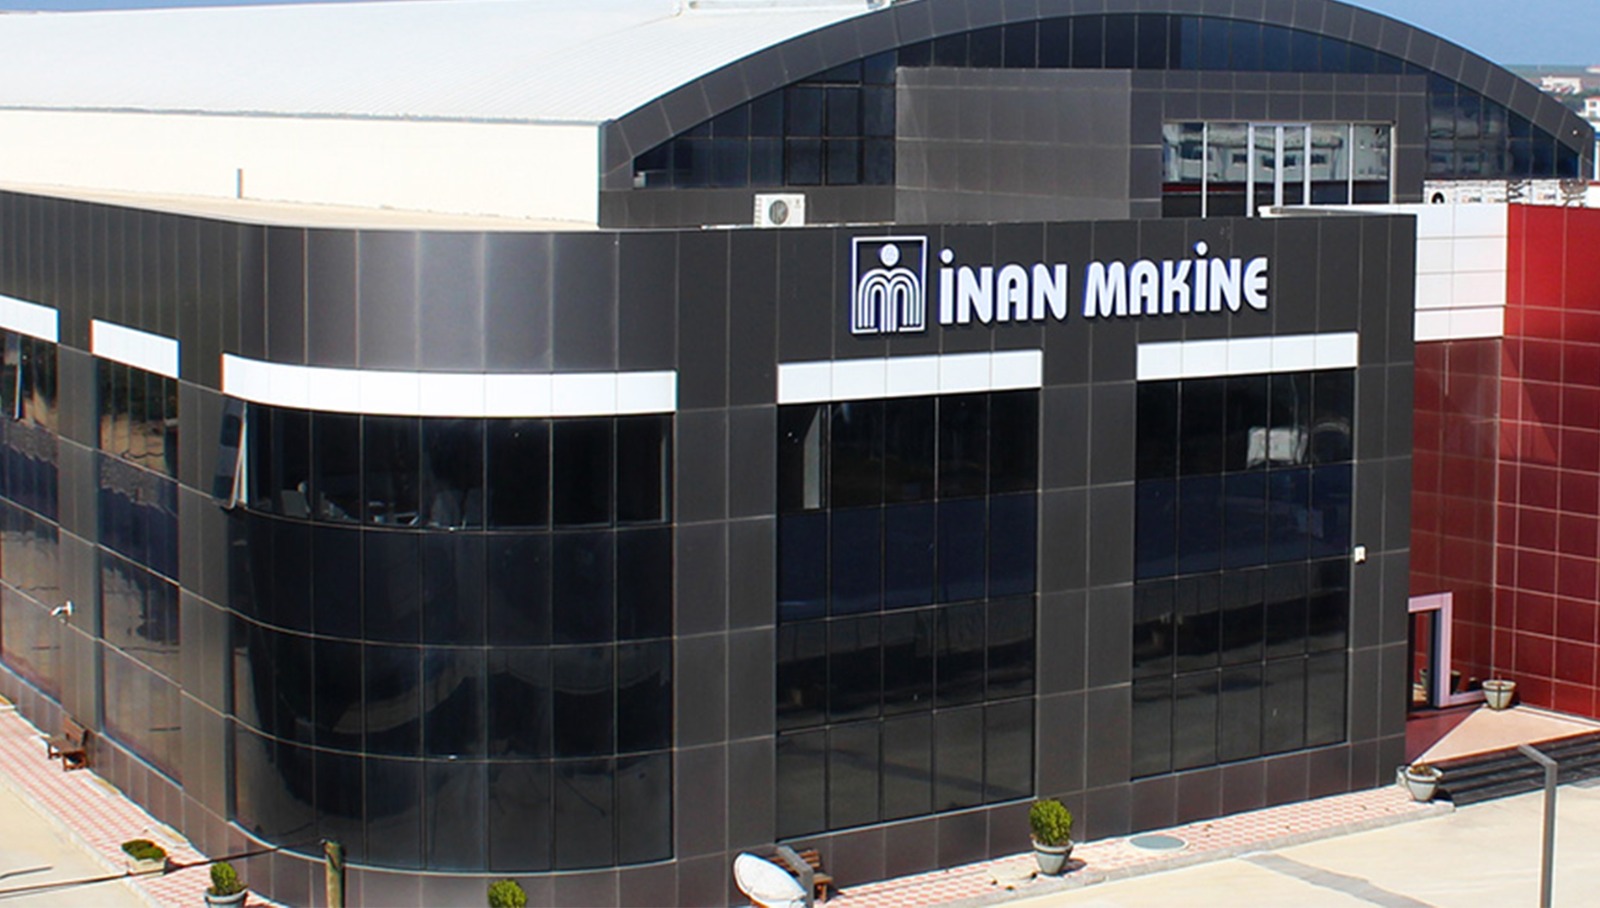 İnan Maschine Plastic Recycling System